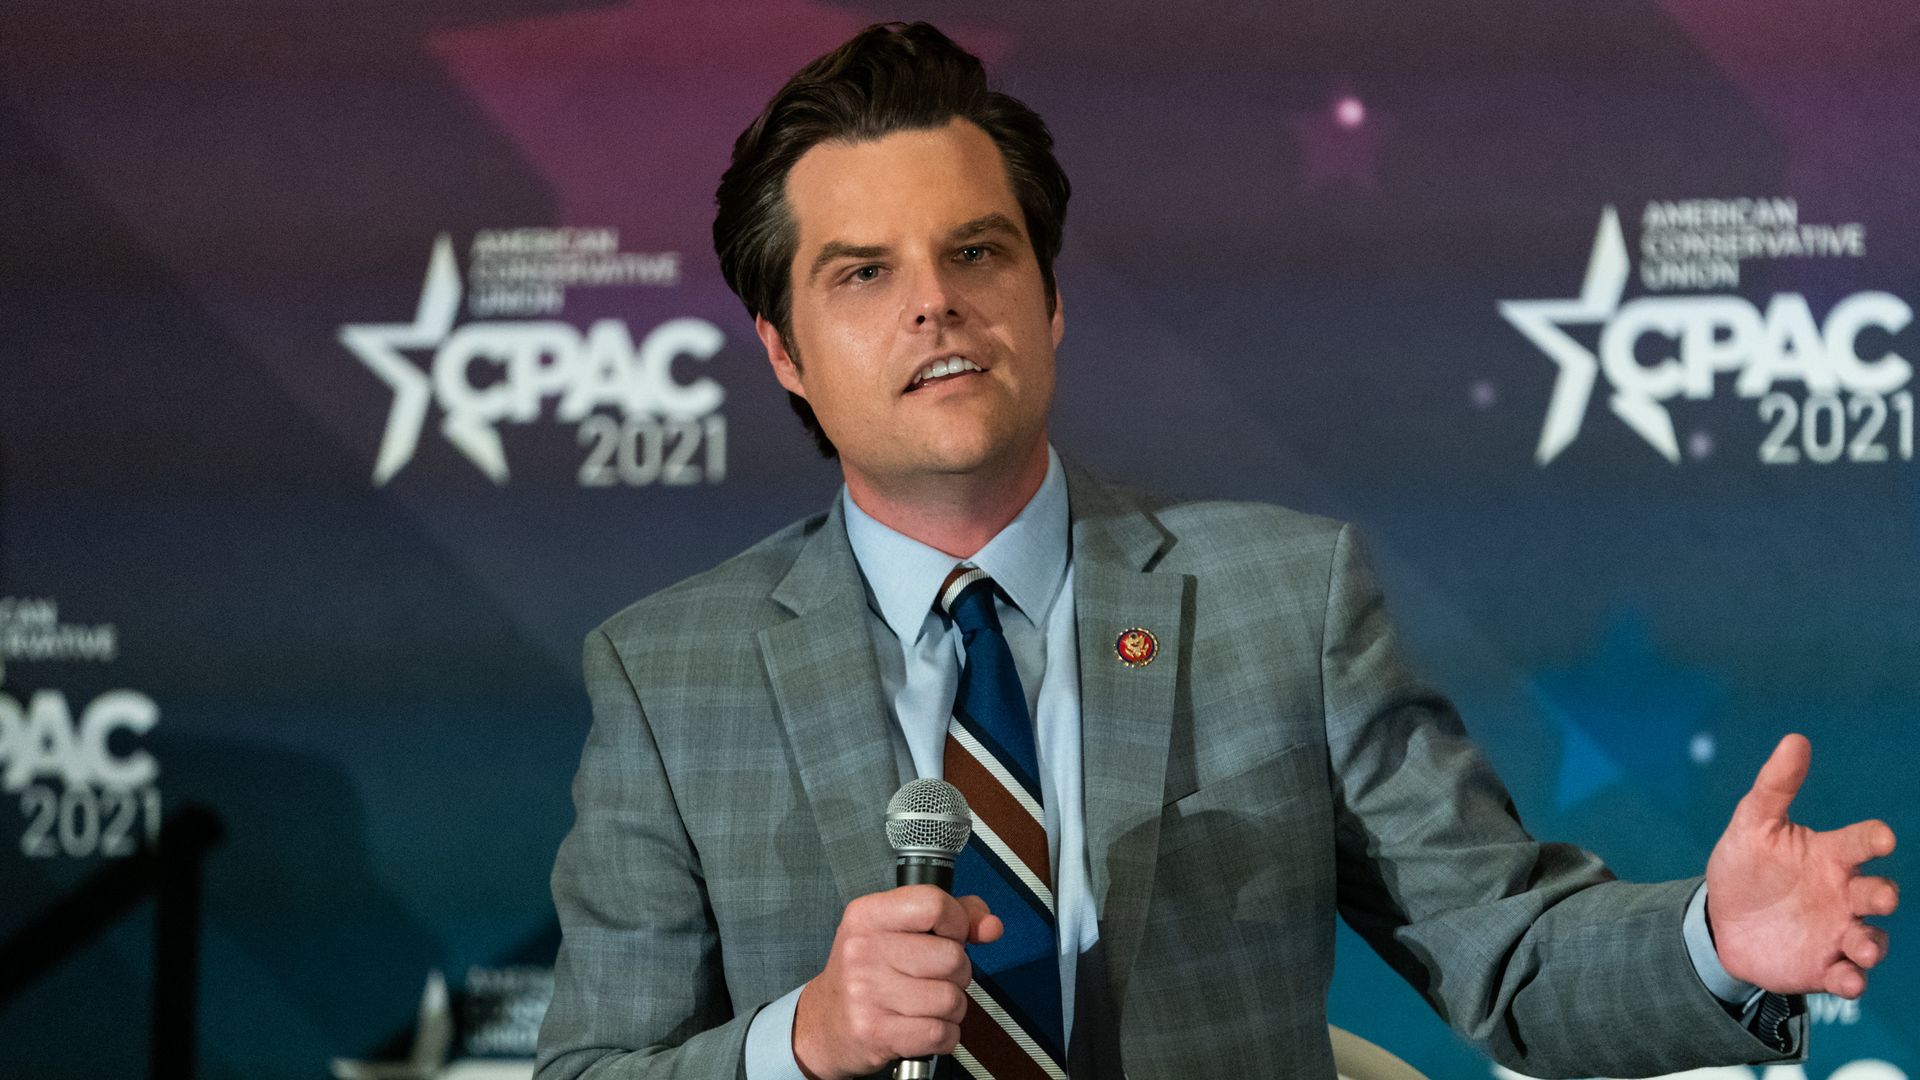 Representative Matt Gaetz, a Republican from Florida, speaks during panel at the Conservative Political Action Conference (CPAC) in Orlando, Florida, 